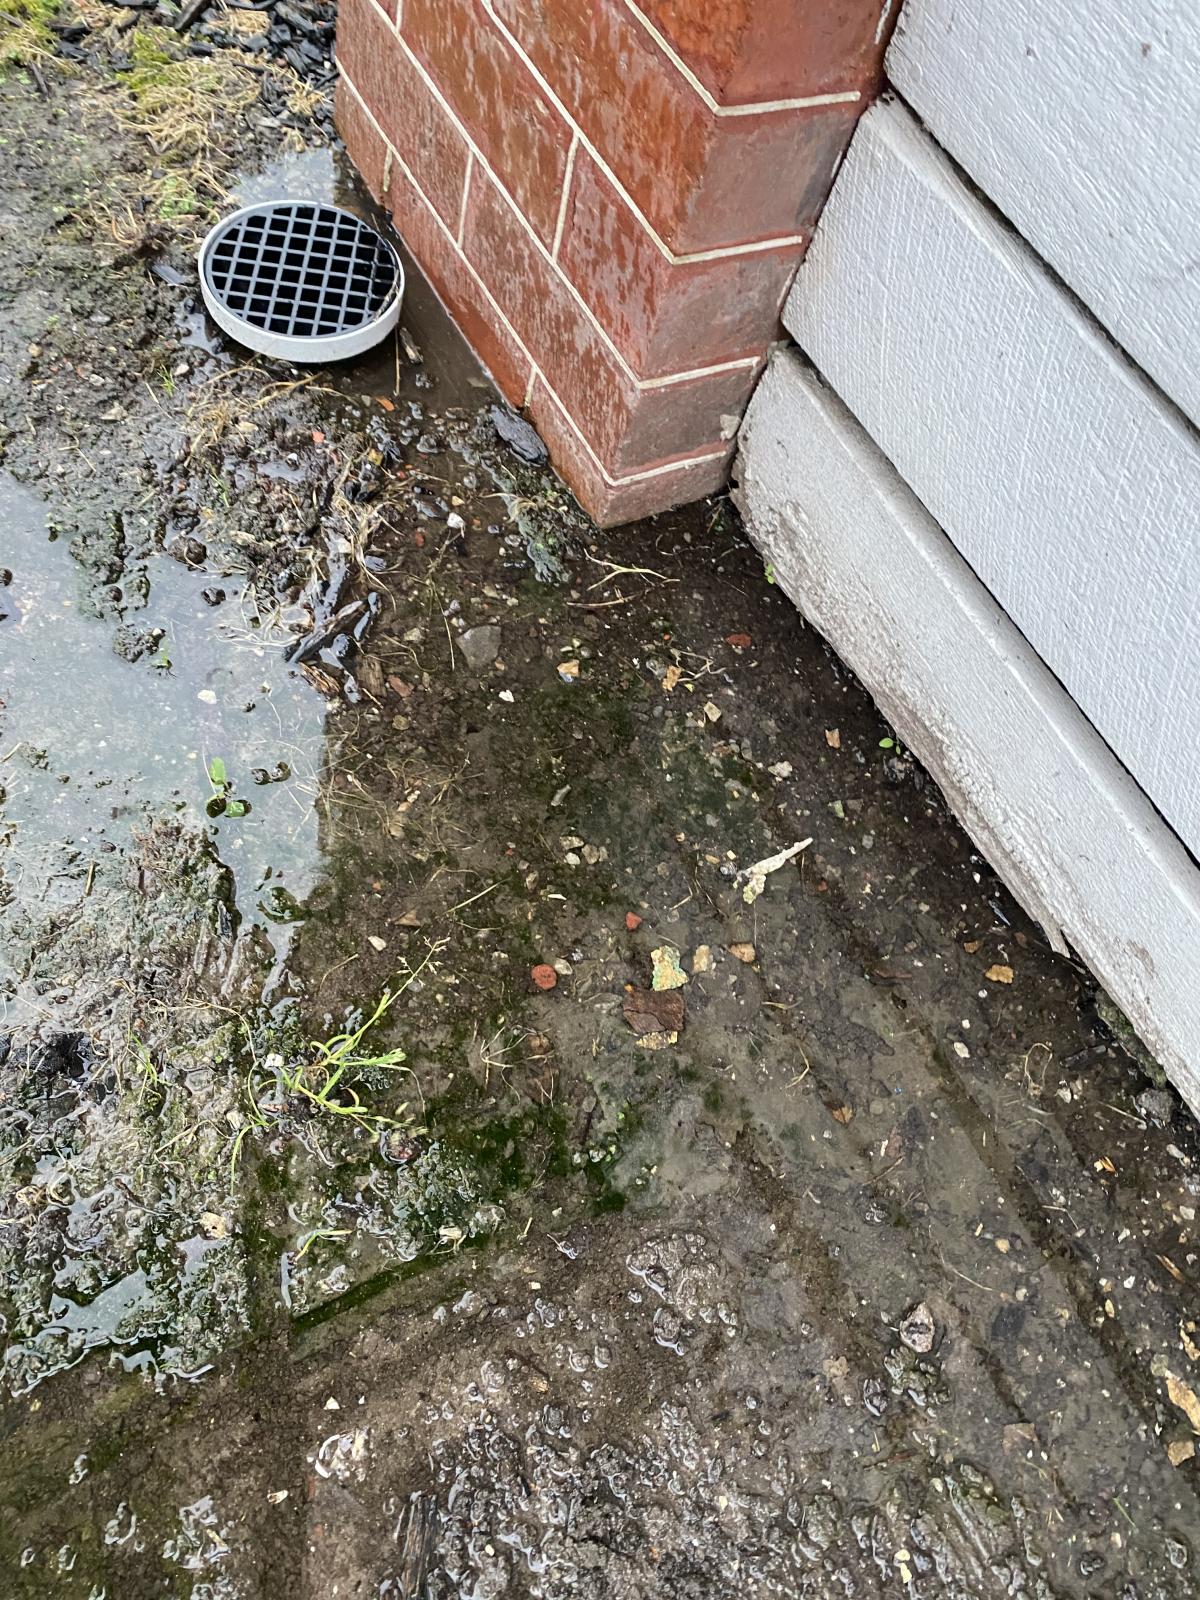 Drainage issues and water pooling